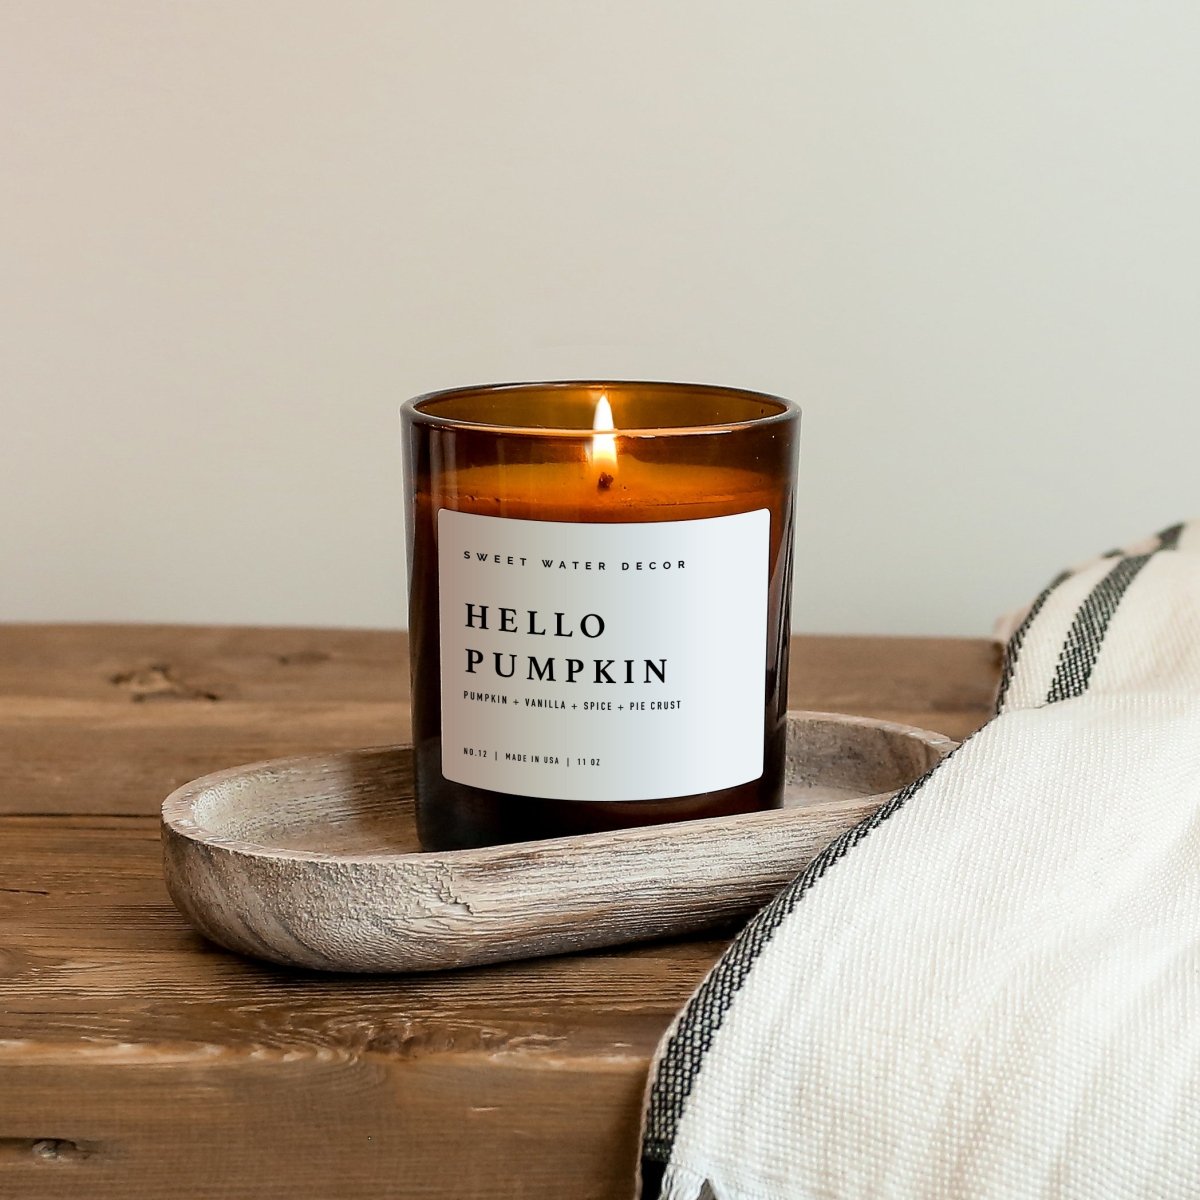 Sweet Water Decor Hello Pumpkin Soy Candle - Amber Jar - 11 oz - lily & onyx